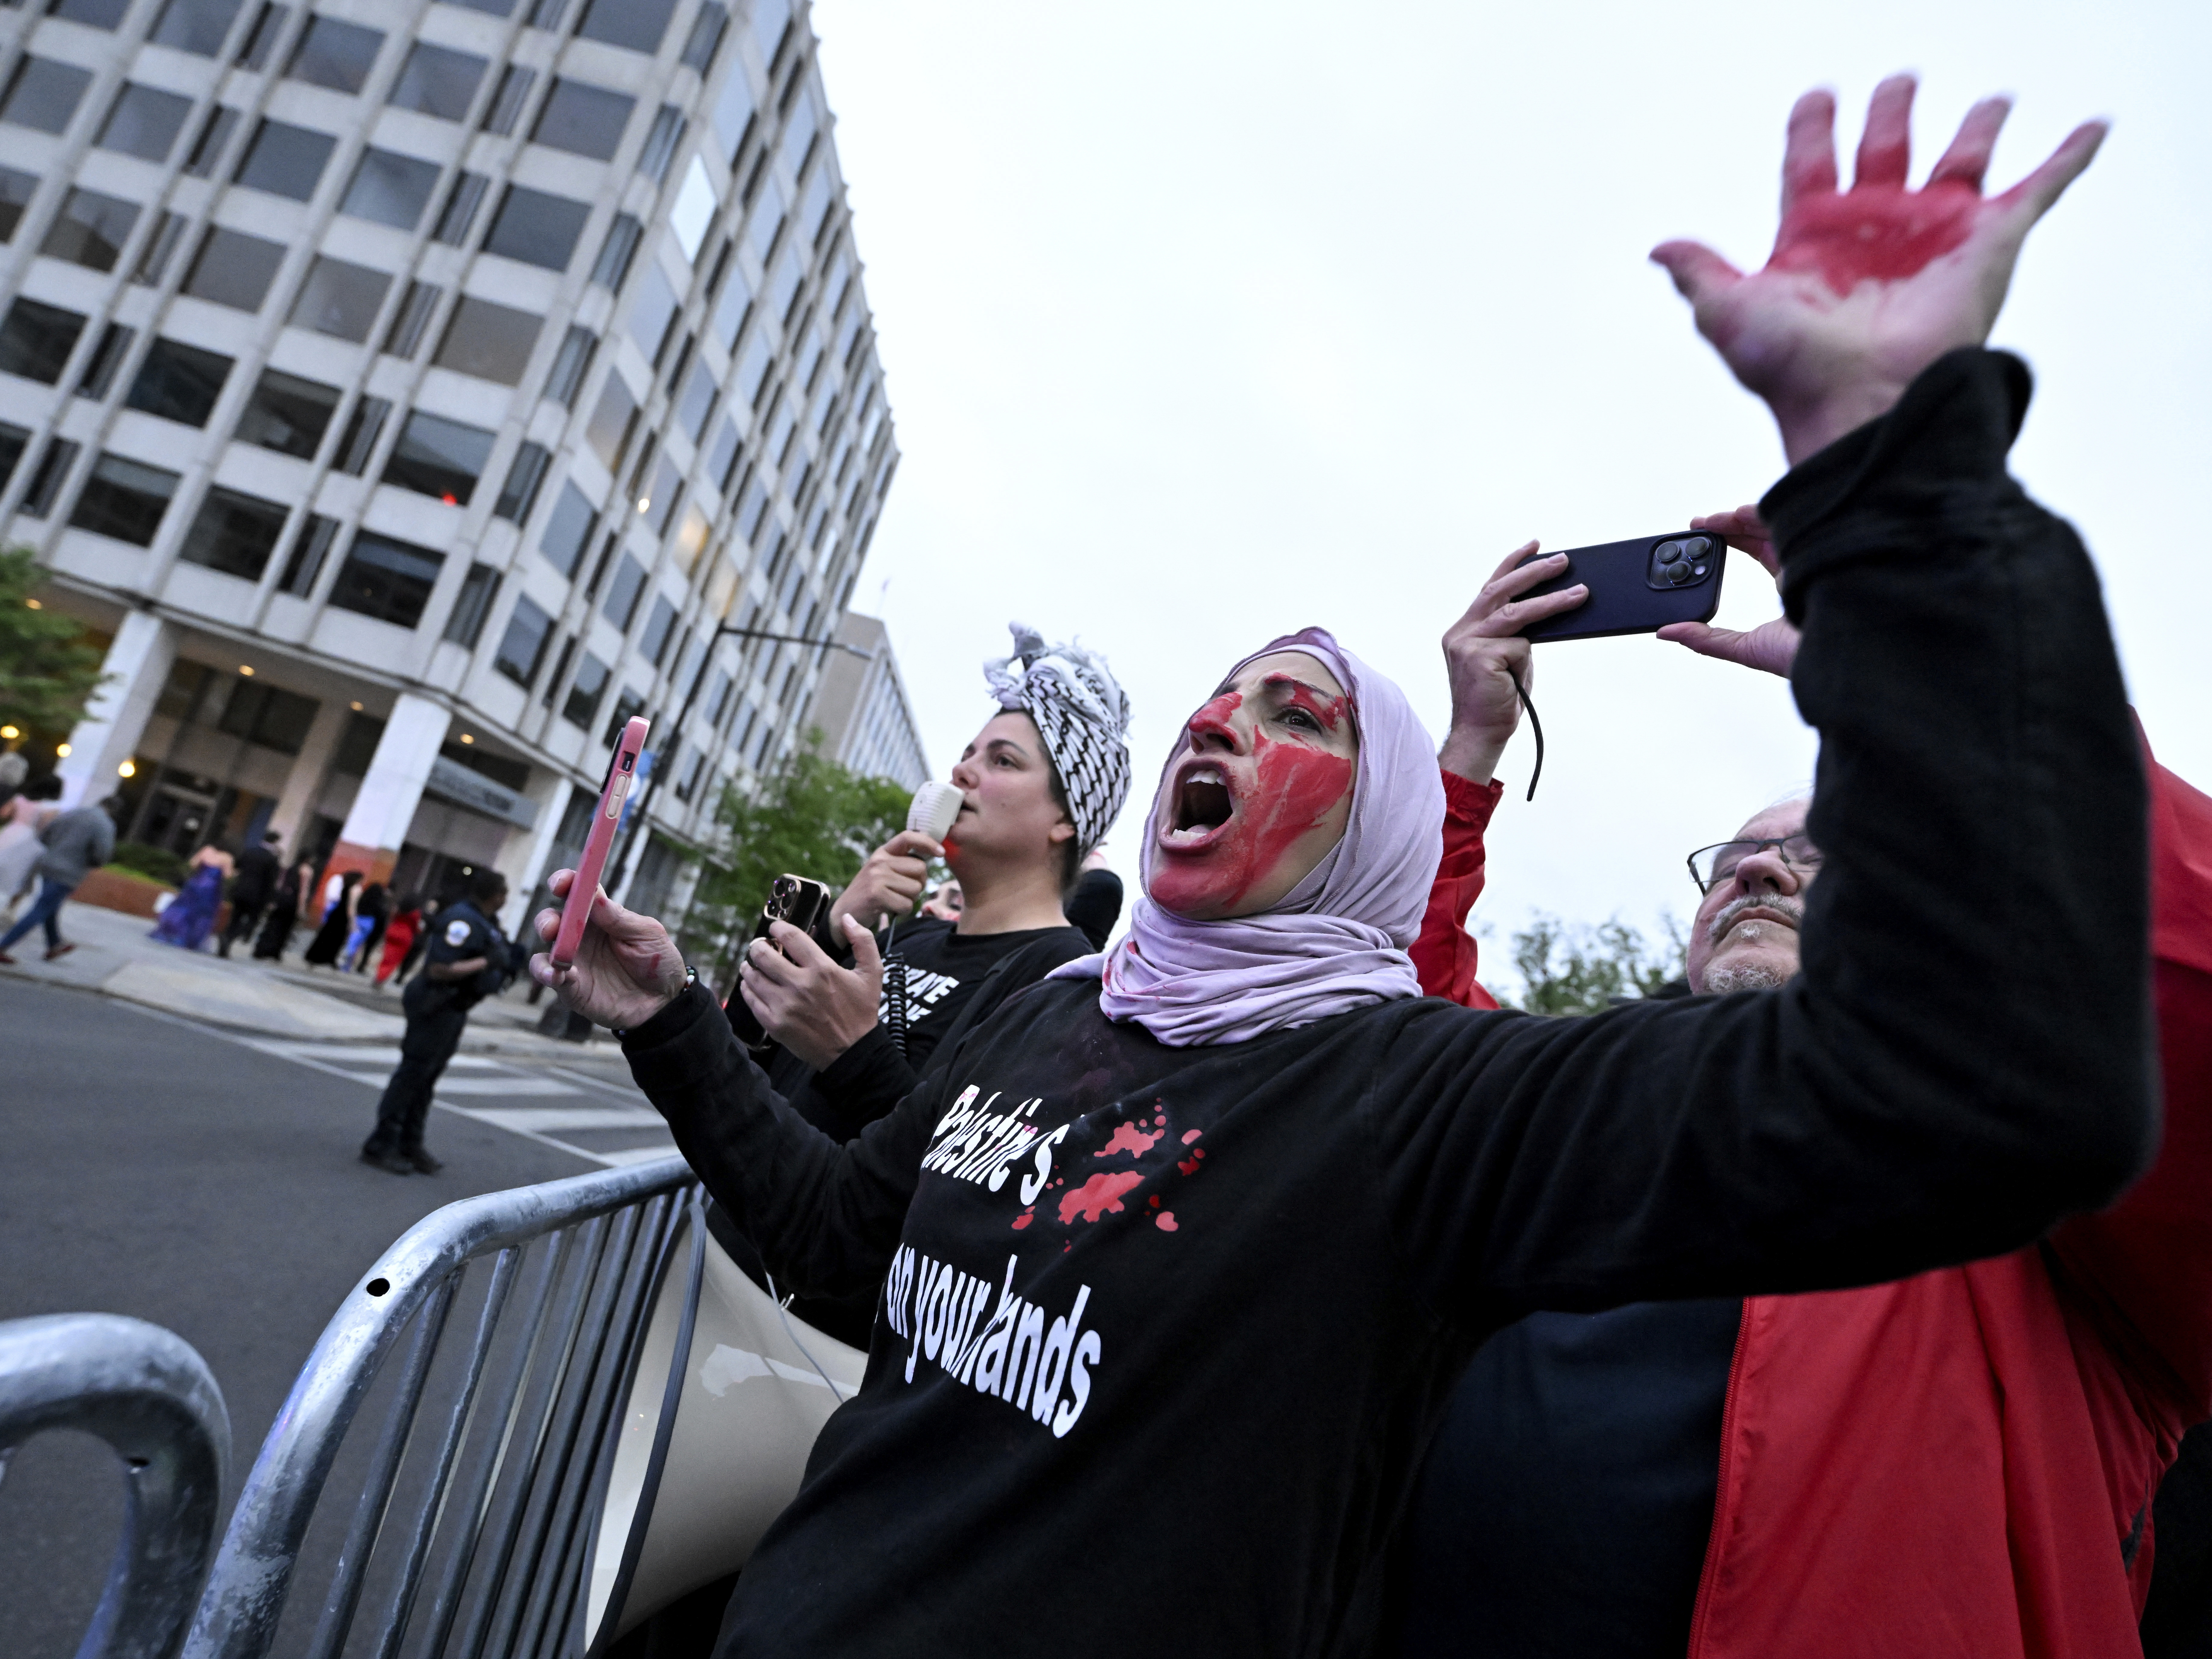 A demonstrator with red paint on their hand and face is seen behind a police barricade during a pro-Palestinian protest over the Israel-Hamas war at the White House Correspondents